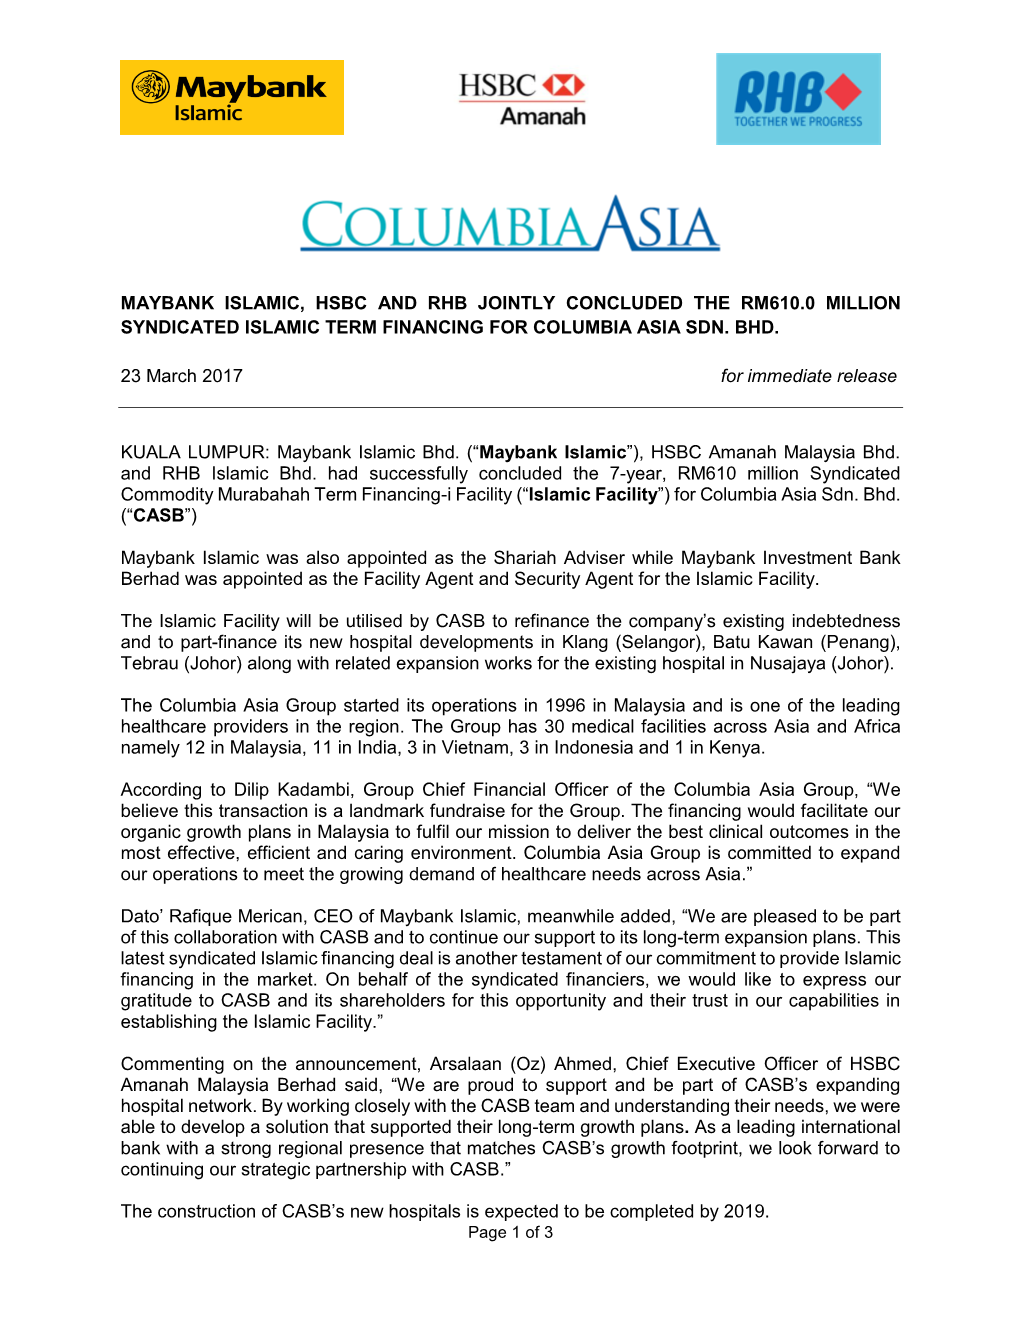 Maybank Islamic, Hsbc and Rhb Jointly Concluded the Rm610.0 Million Syndicated Islamic Term Financing for Columbia Asia Sdn